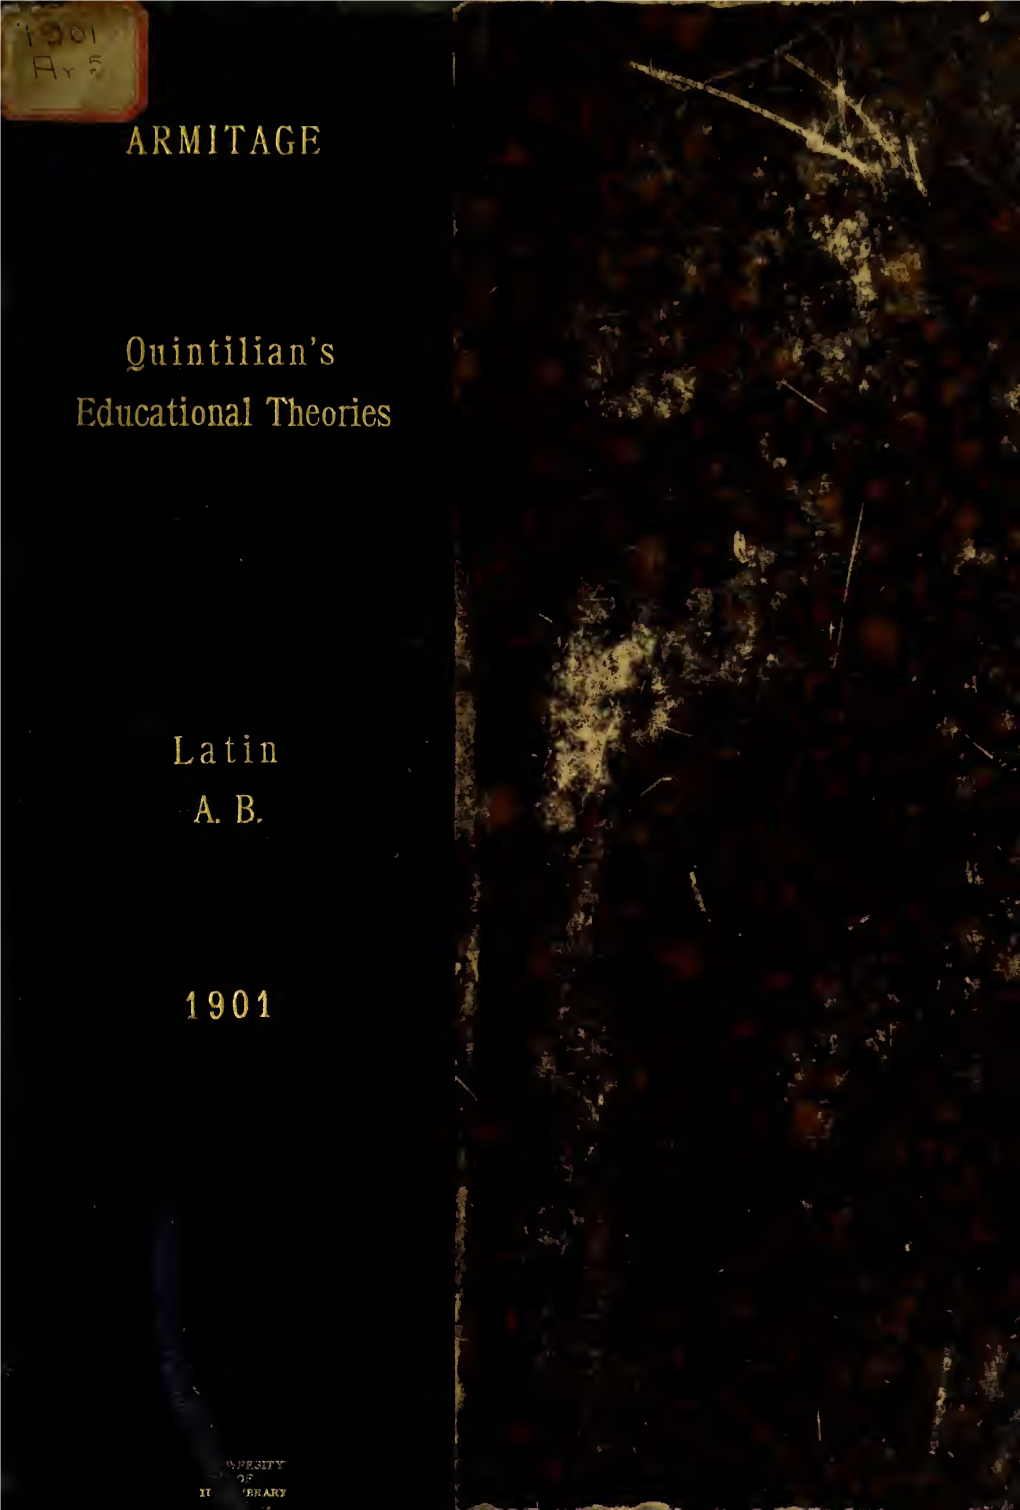 Quintilian's Educational Theories